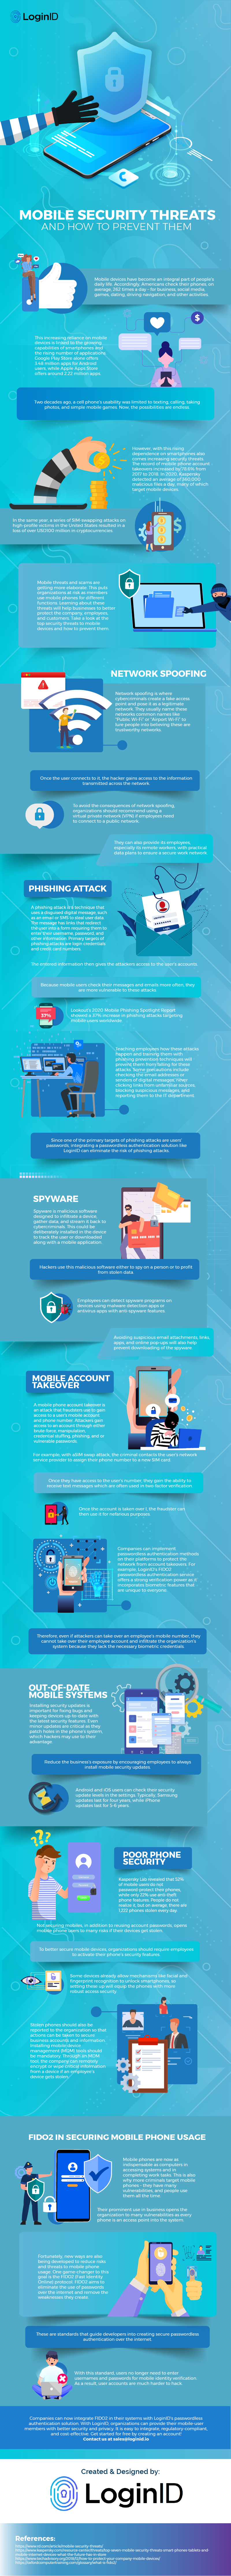 Mobile-Security-Threats-and-How to-Prevent-Them-infographic-image